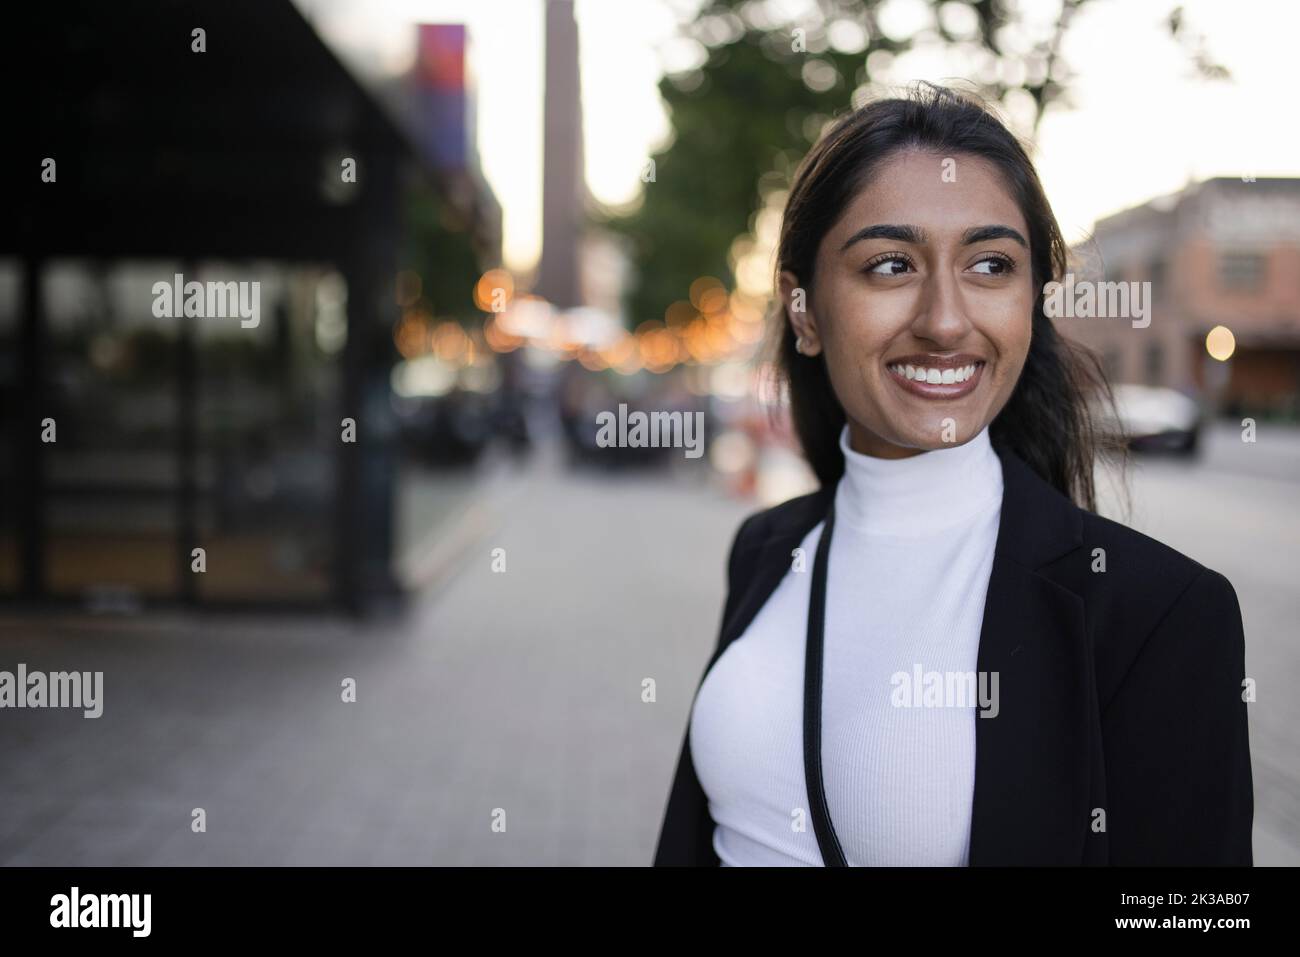 Portrait of south asian woman on city street Stock Photo